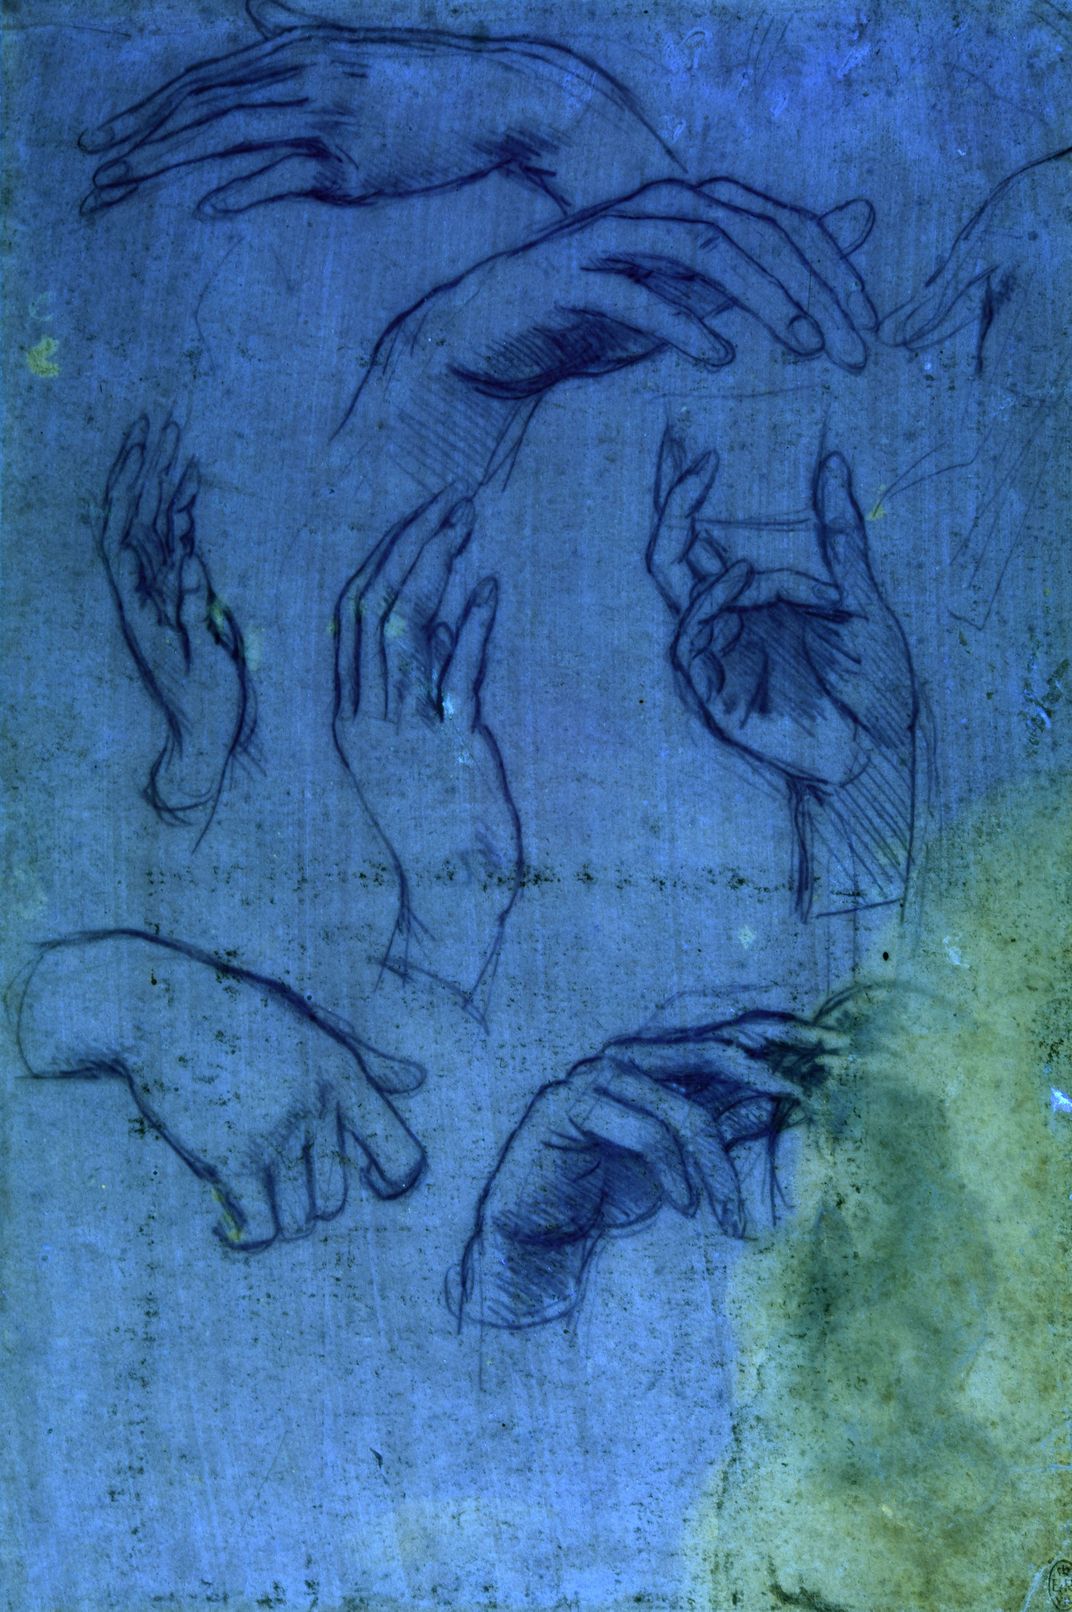 Exhibition to Reveal da Vinci’s Invisible Drawings